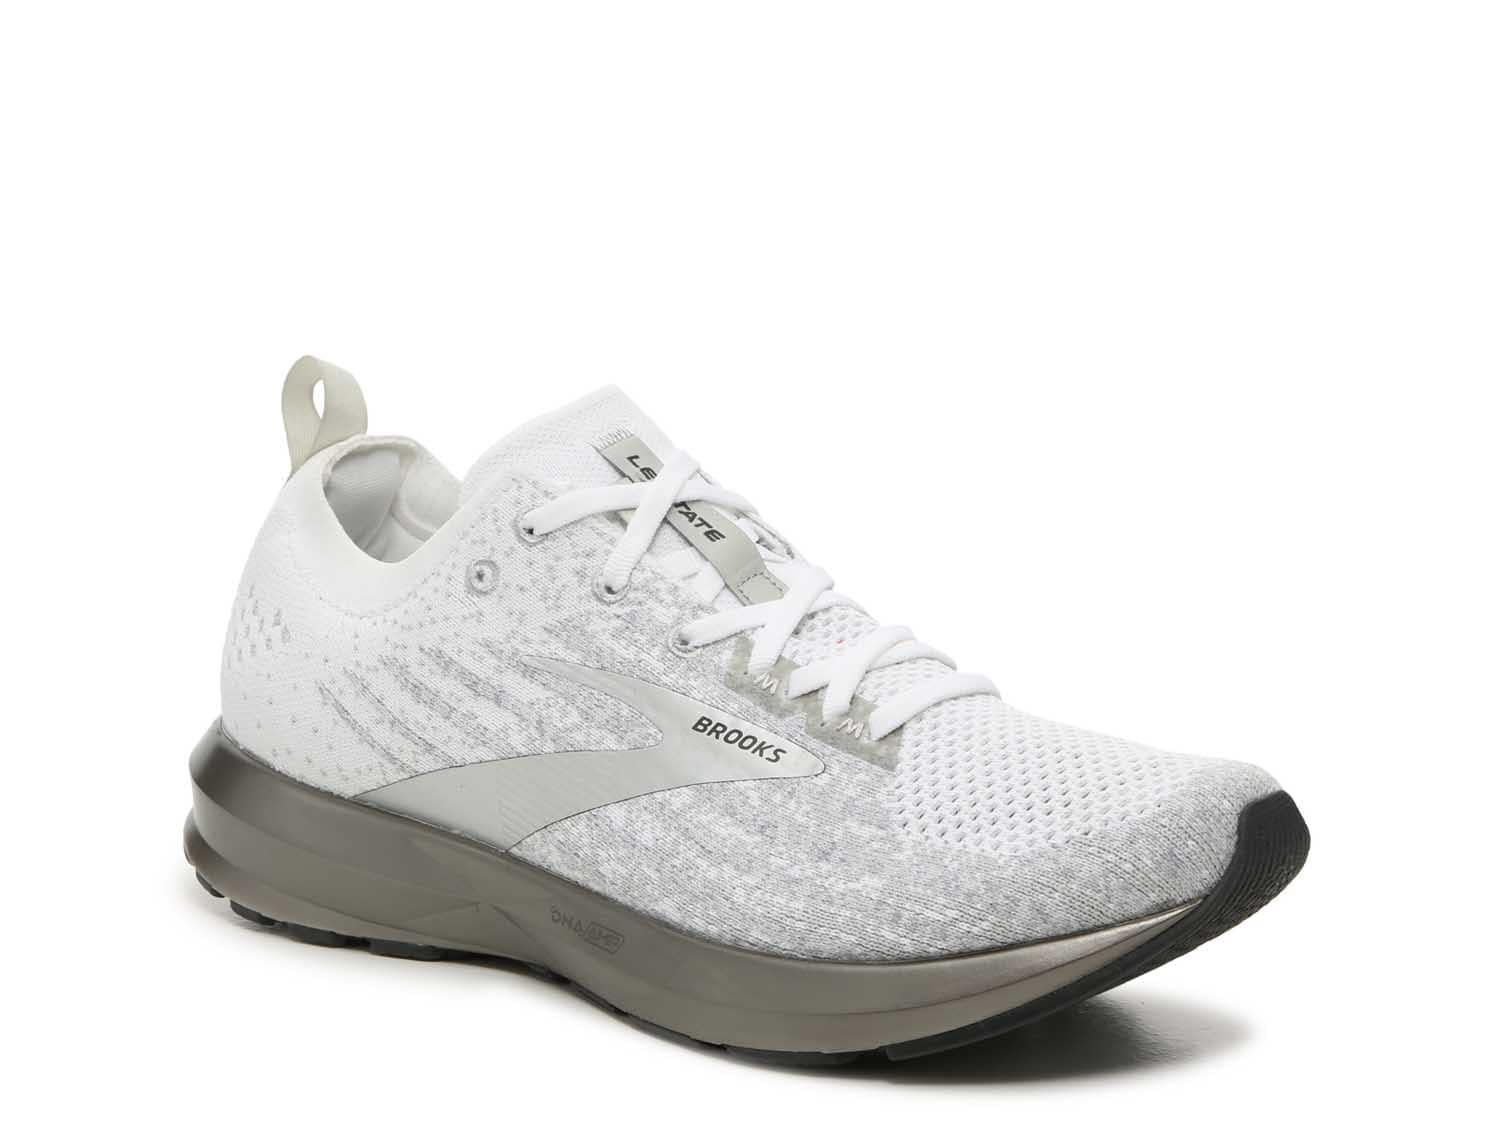 dsw mens running shoes